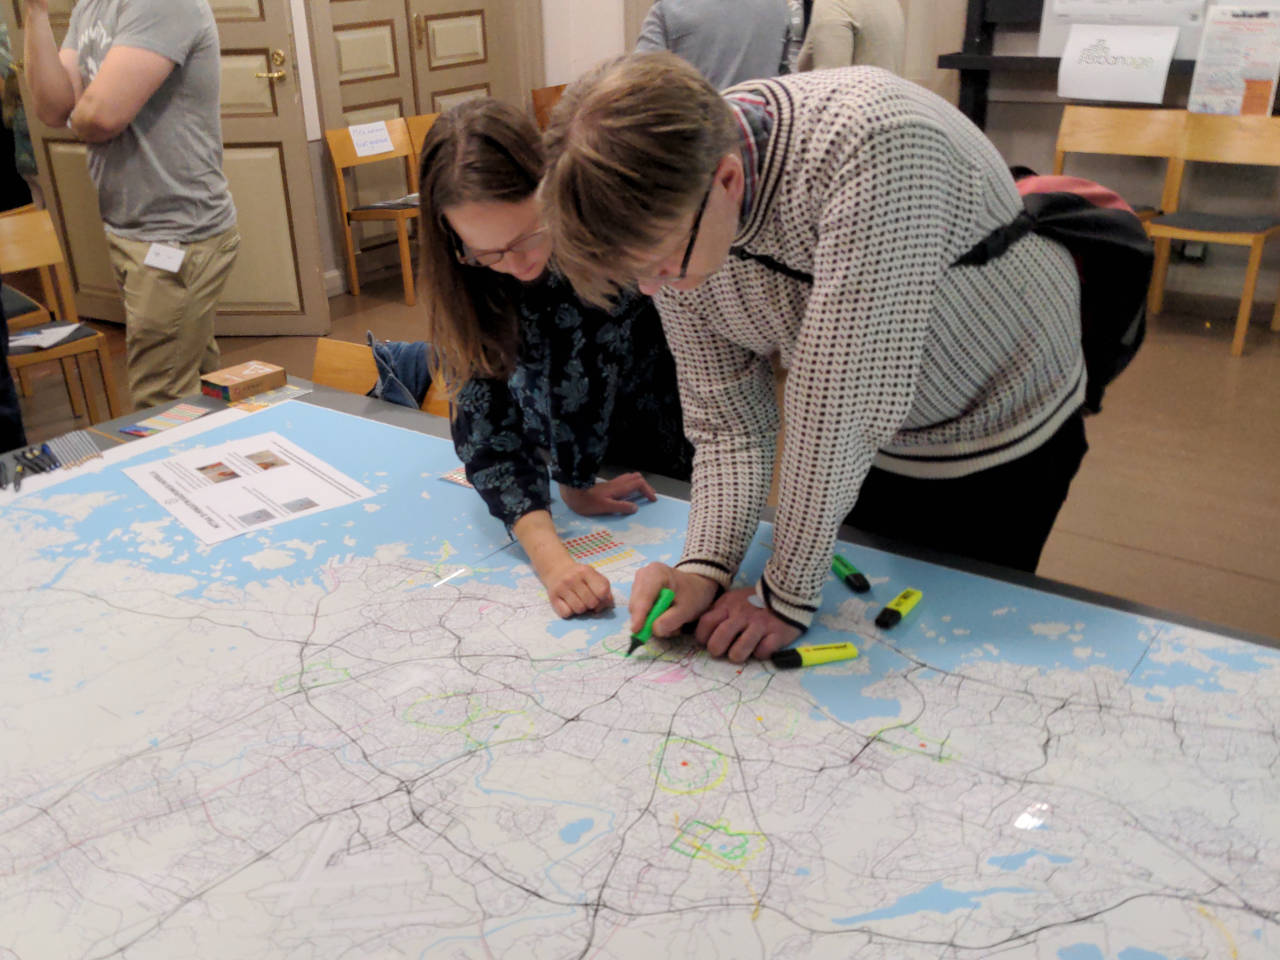 Two visitors lean over a large map (1.5 x 3.5 metres) of the Helsinki metropolitan area, drawing the area covered by 15 minutes walking around an important location to their lives